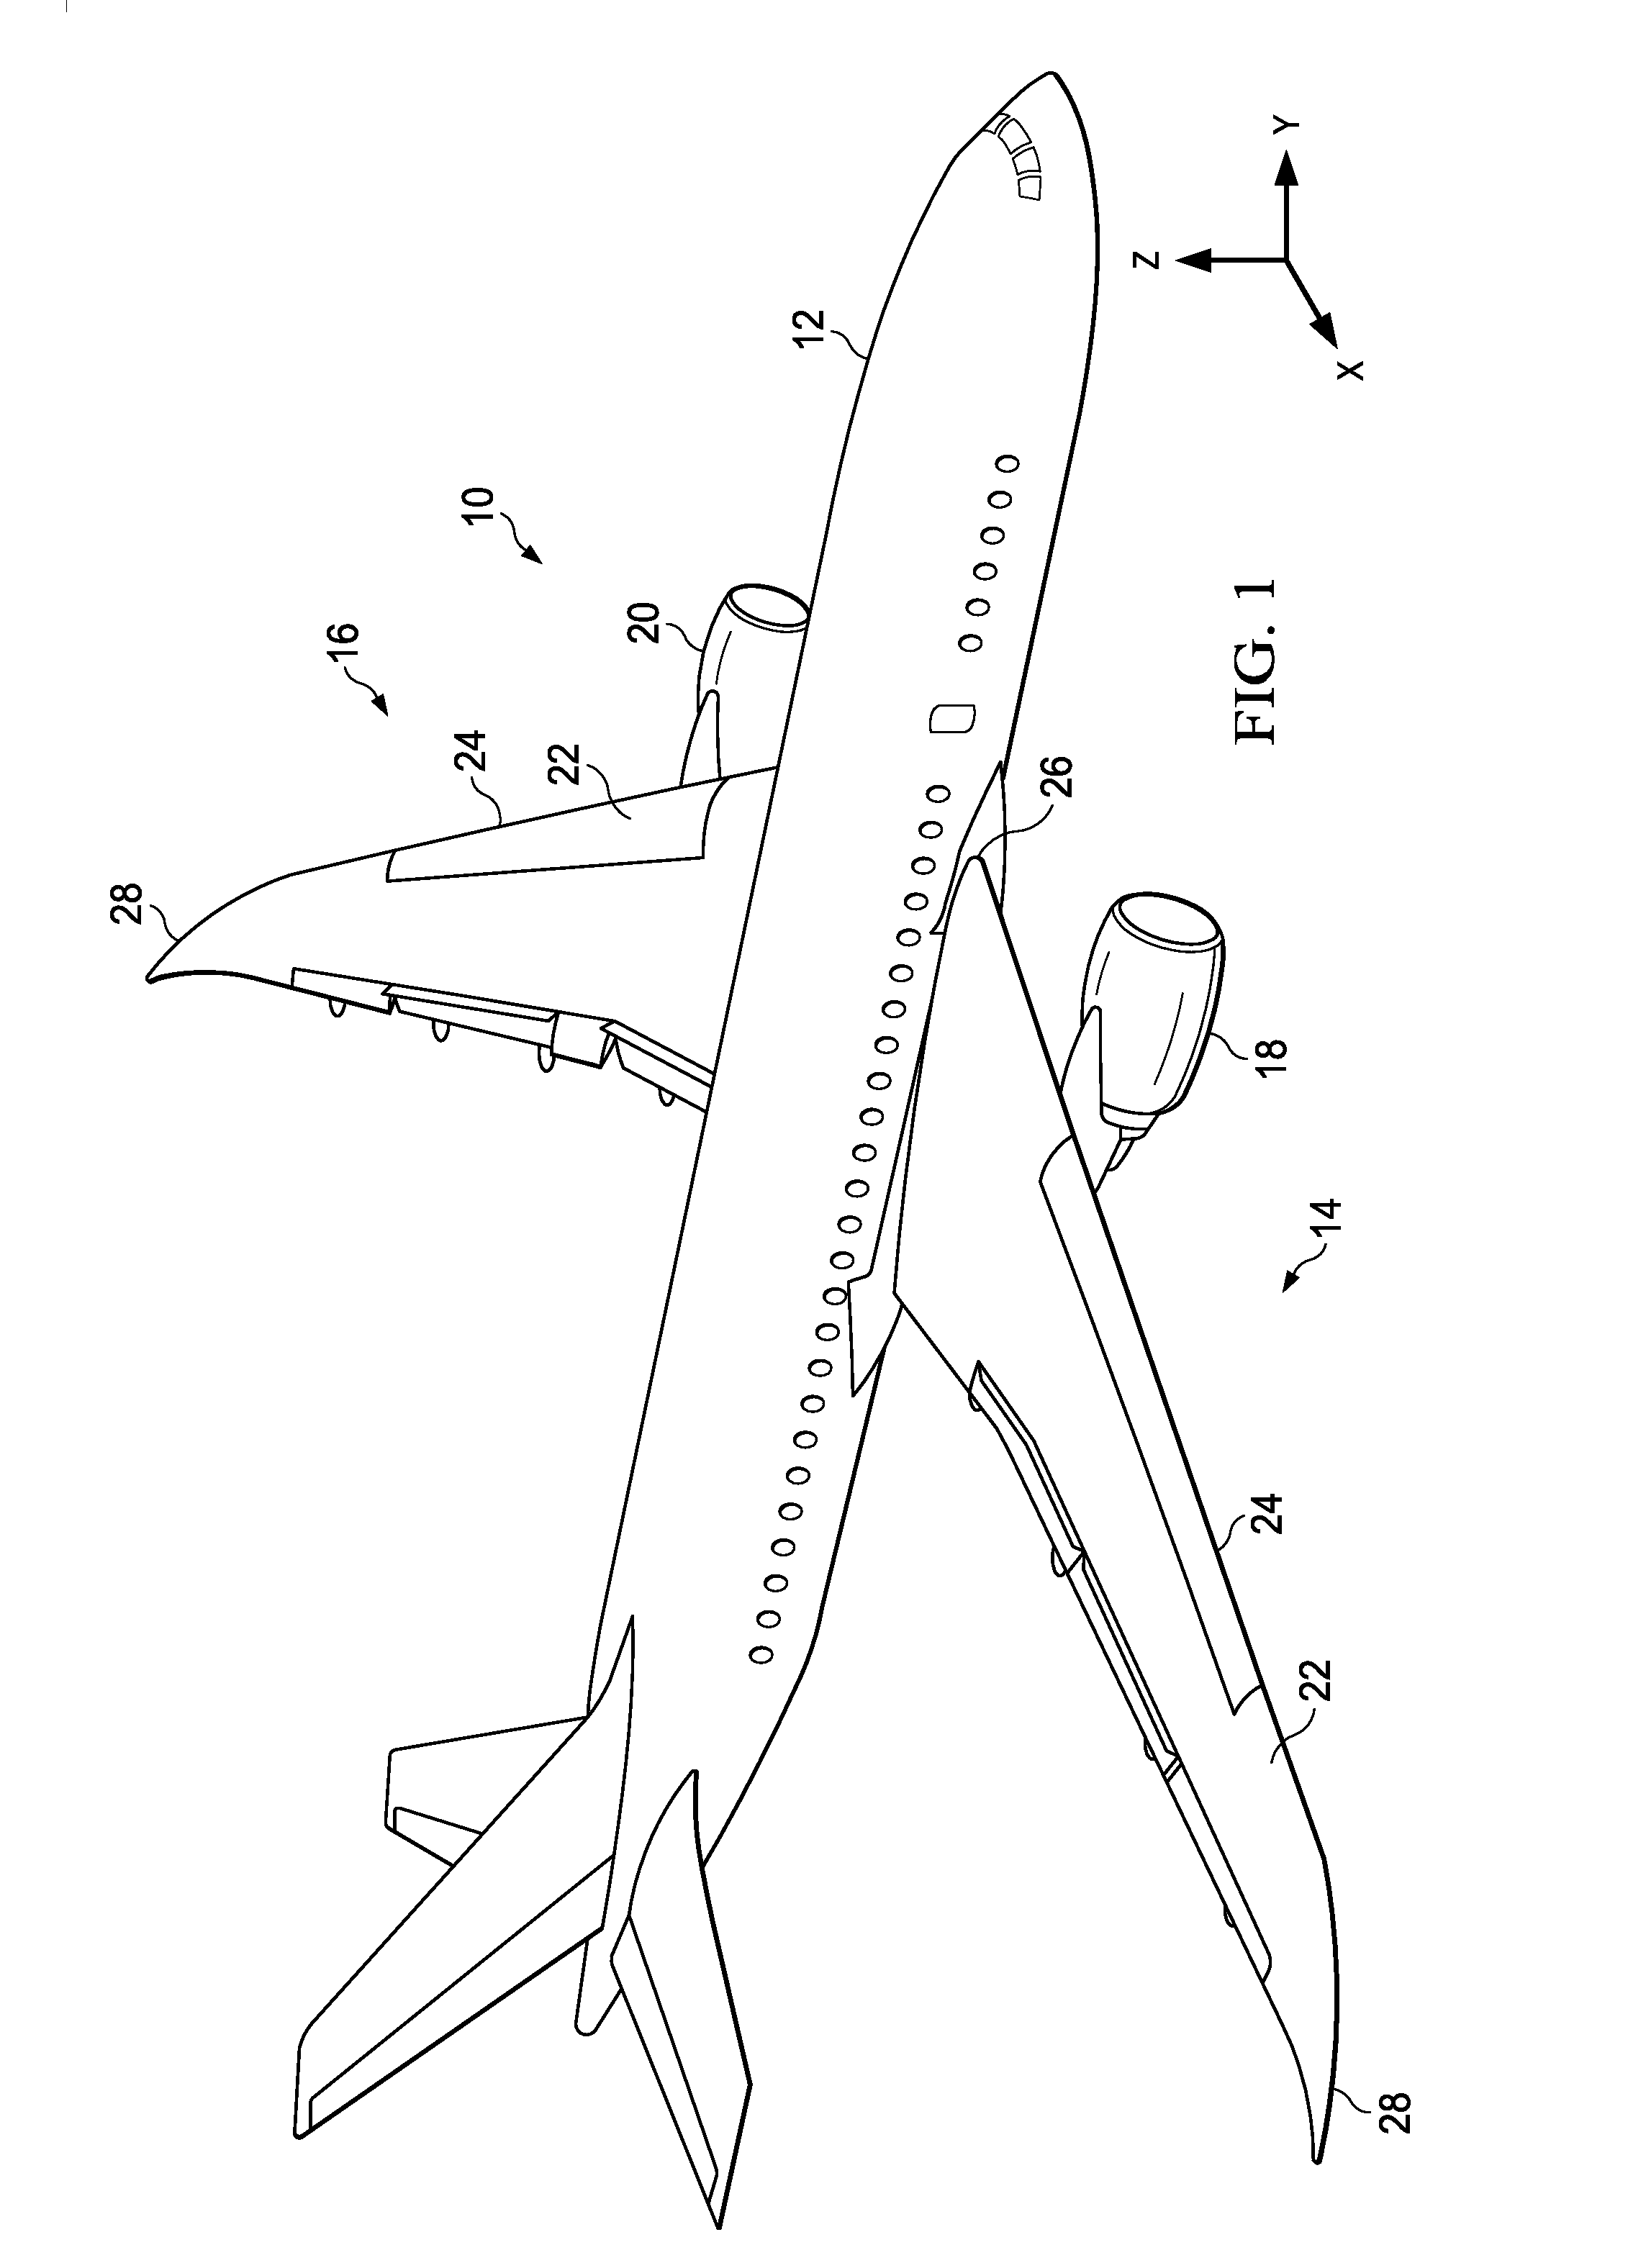 Bonded Composite Aircraft Wing